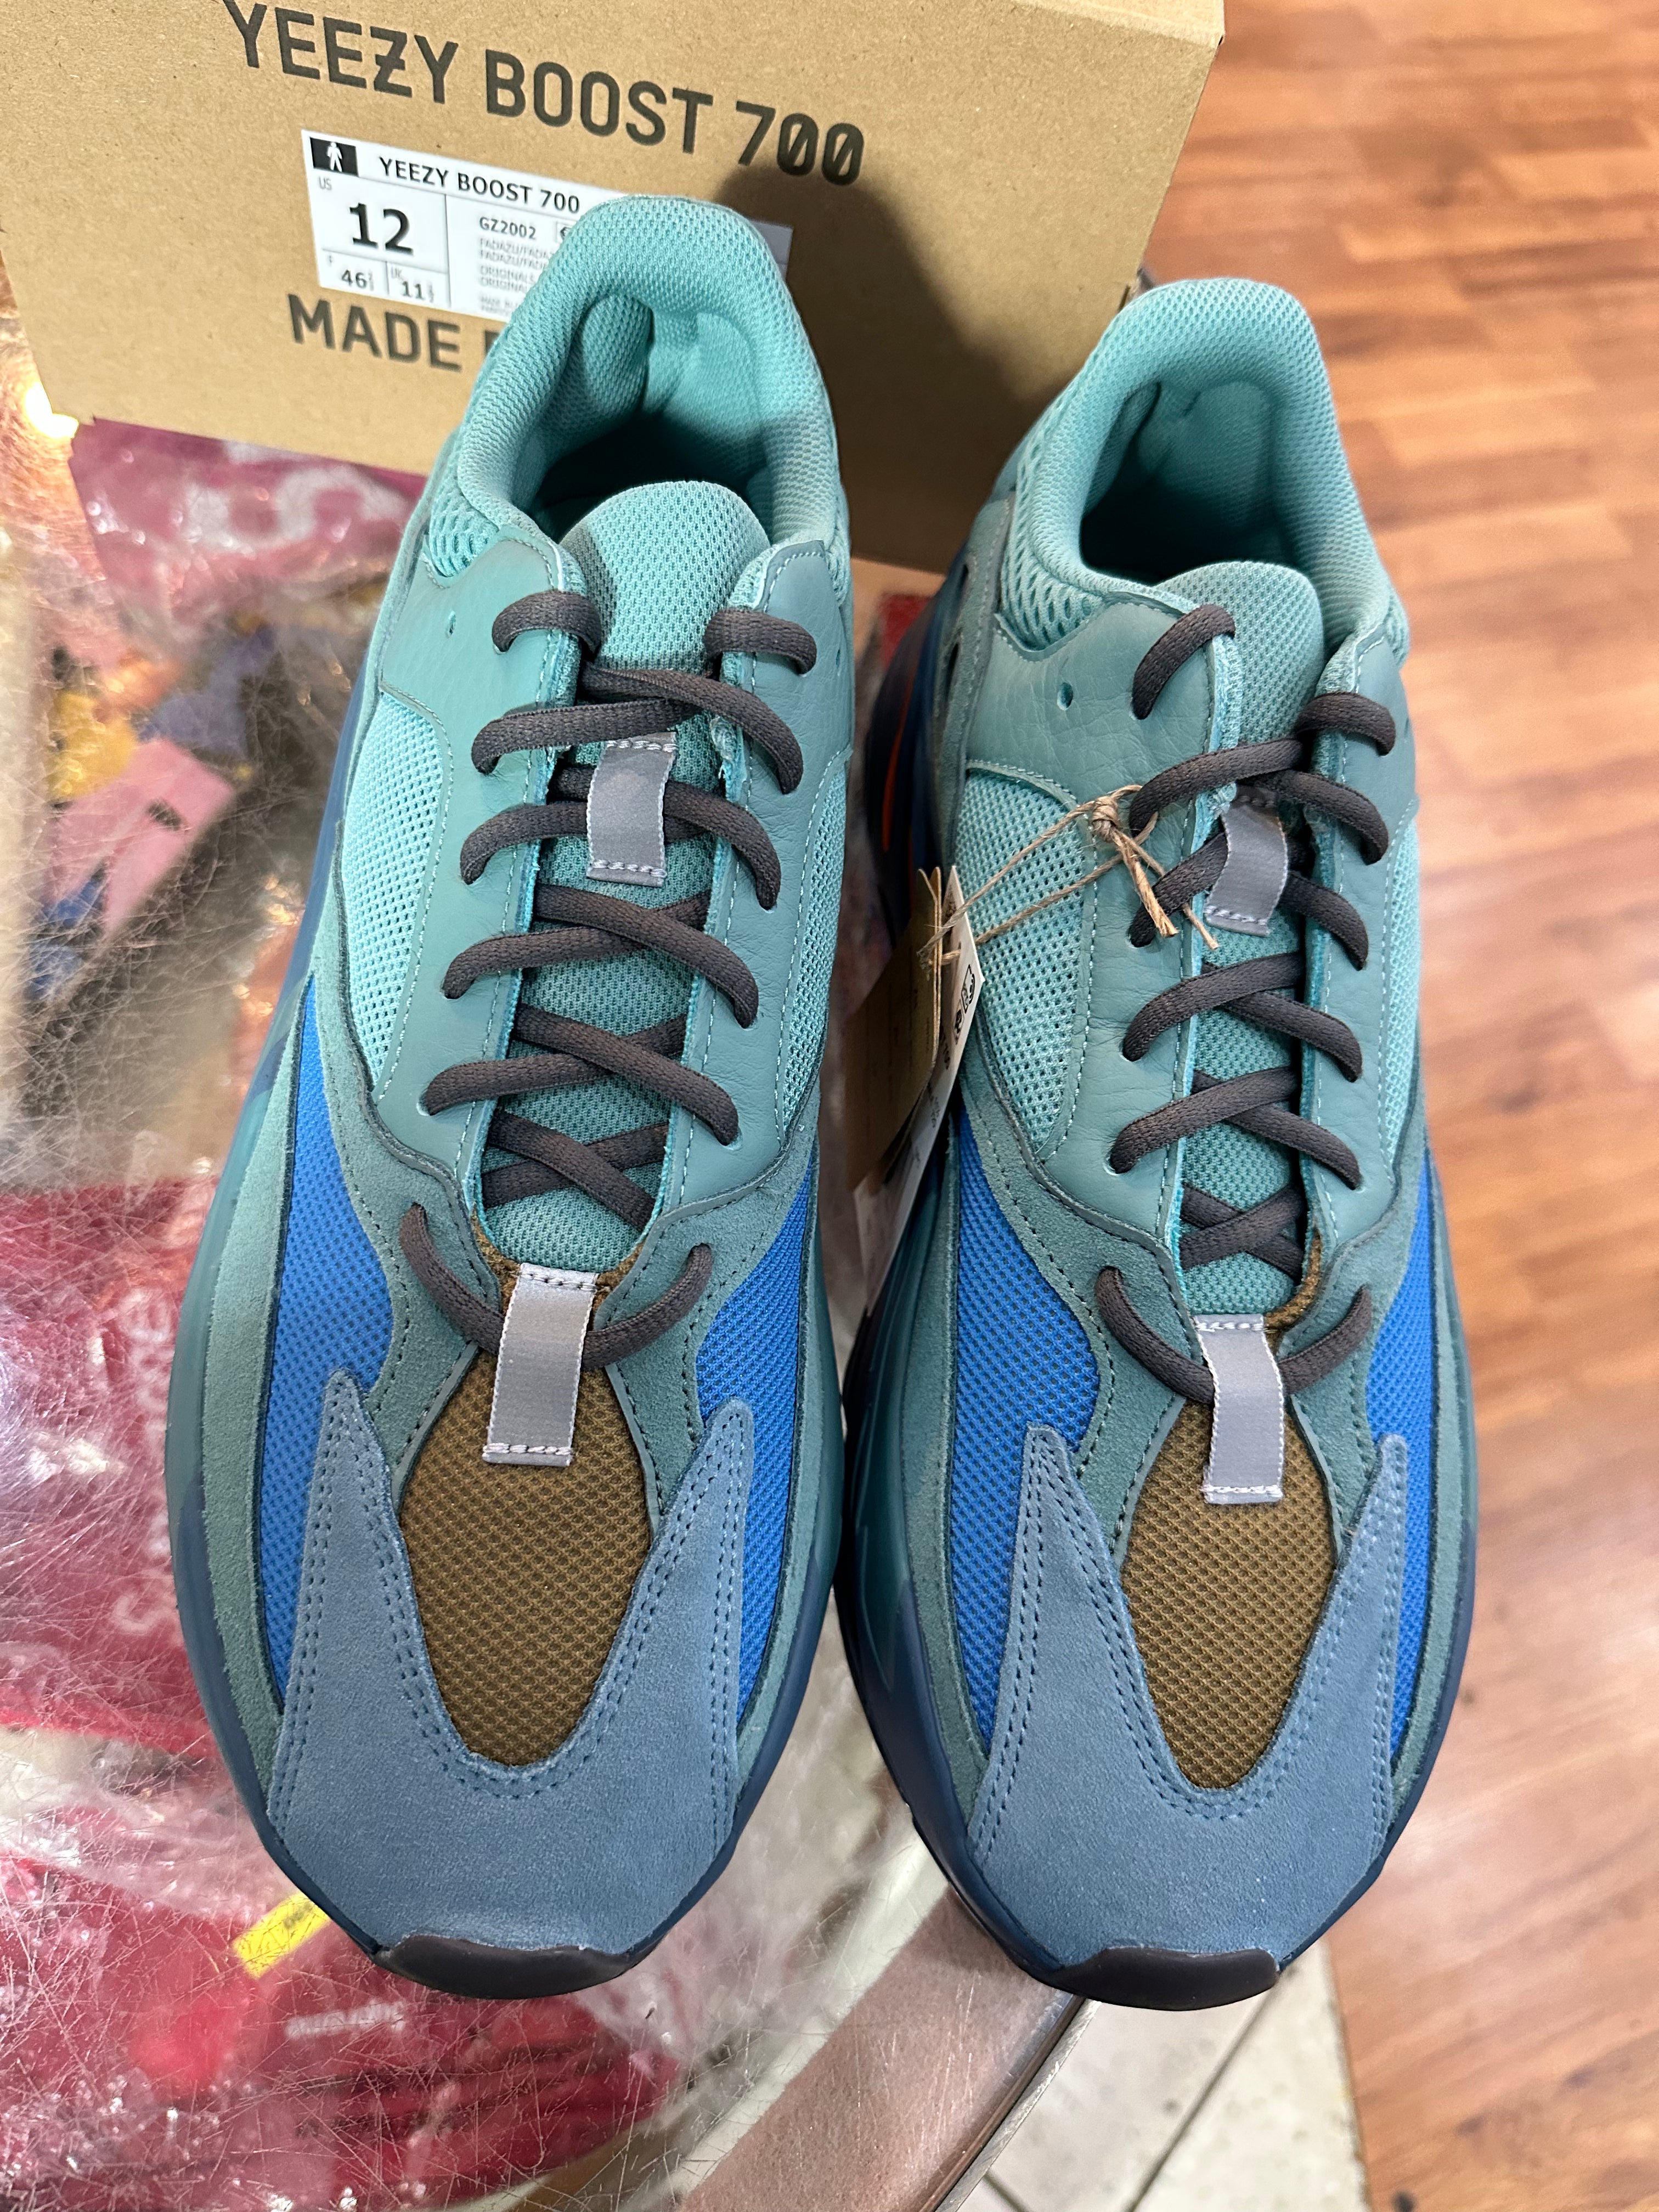 Brand new Faded Azure Adidas Yeezy Boost 700 size 12